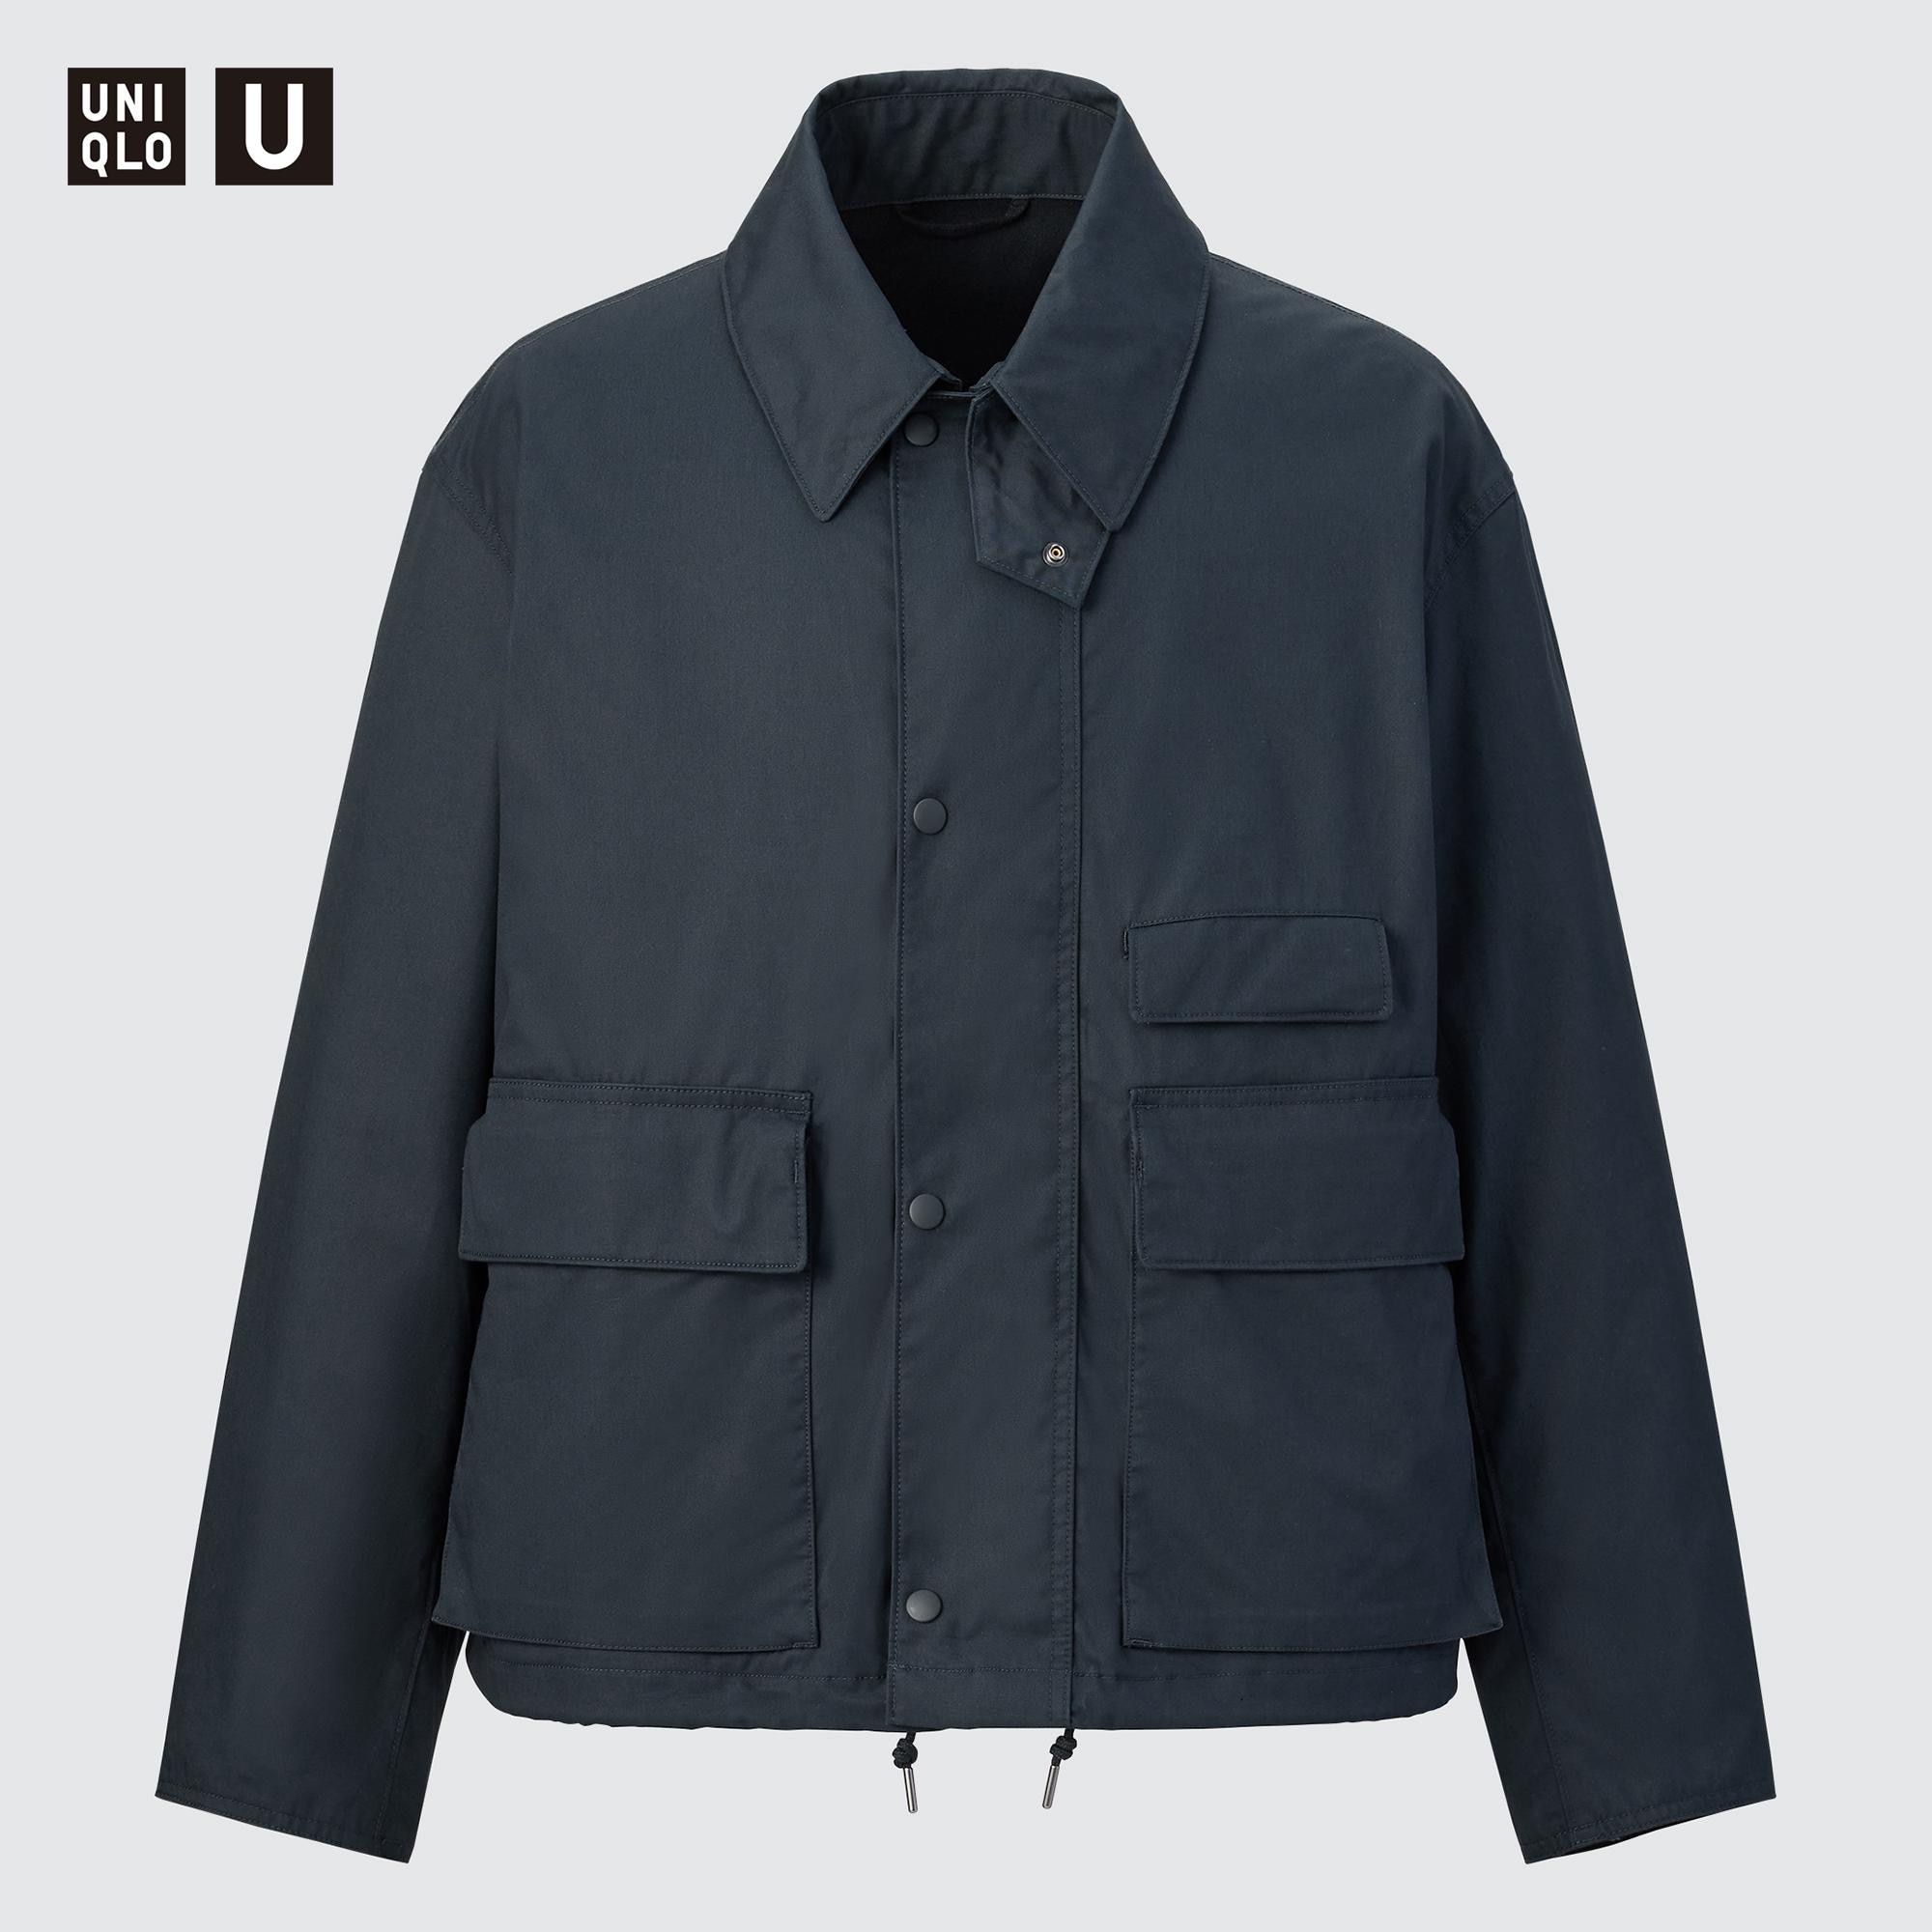 Keep cosy in our warmest down jackets and coats  UNIQLO TODAY  UNIQLO EU